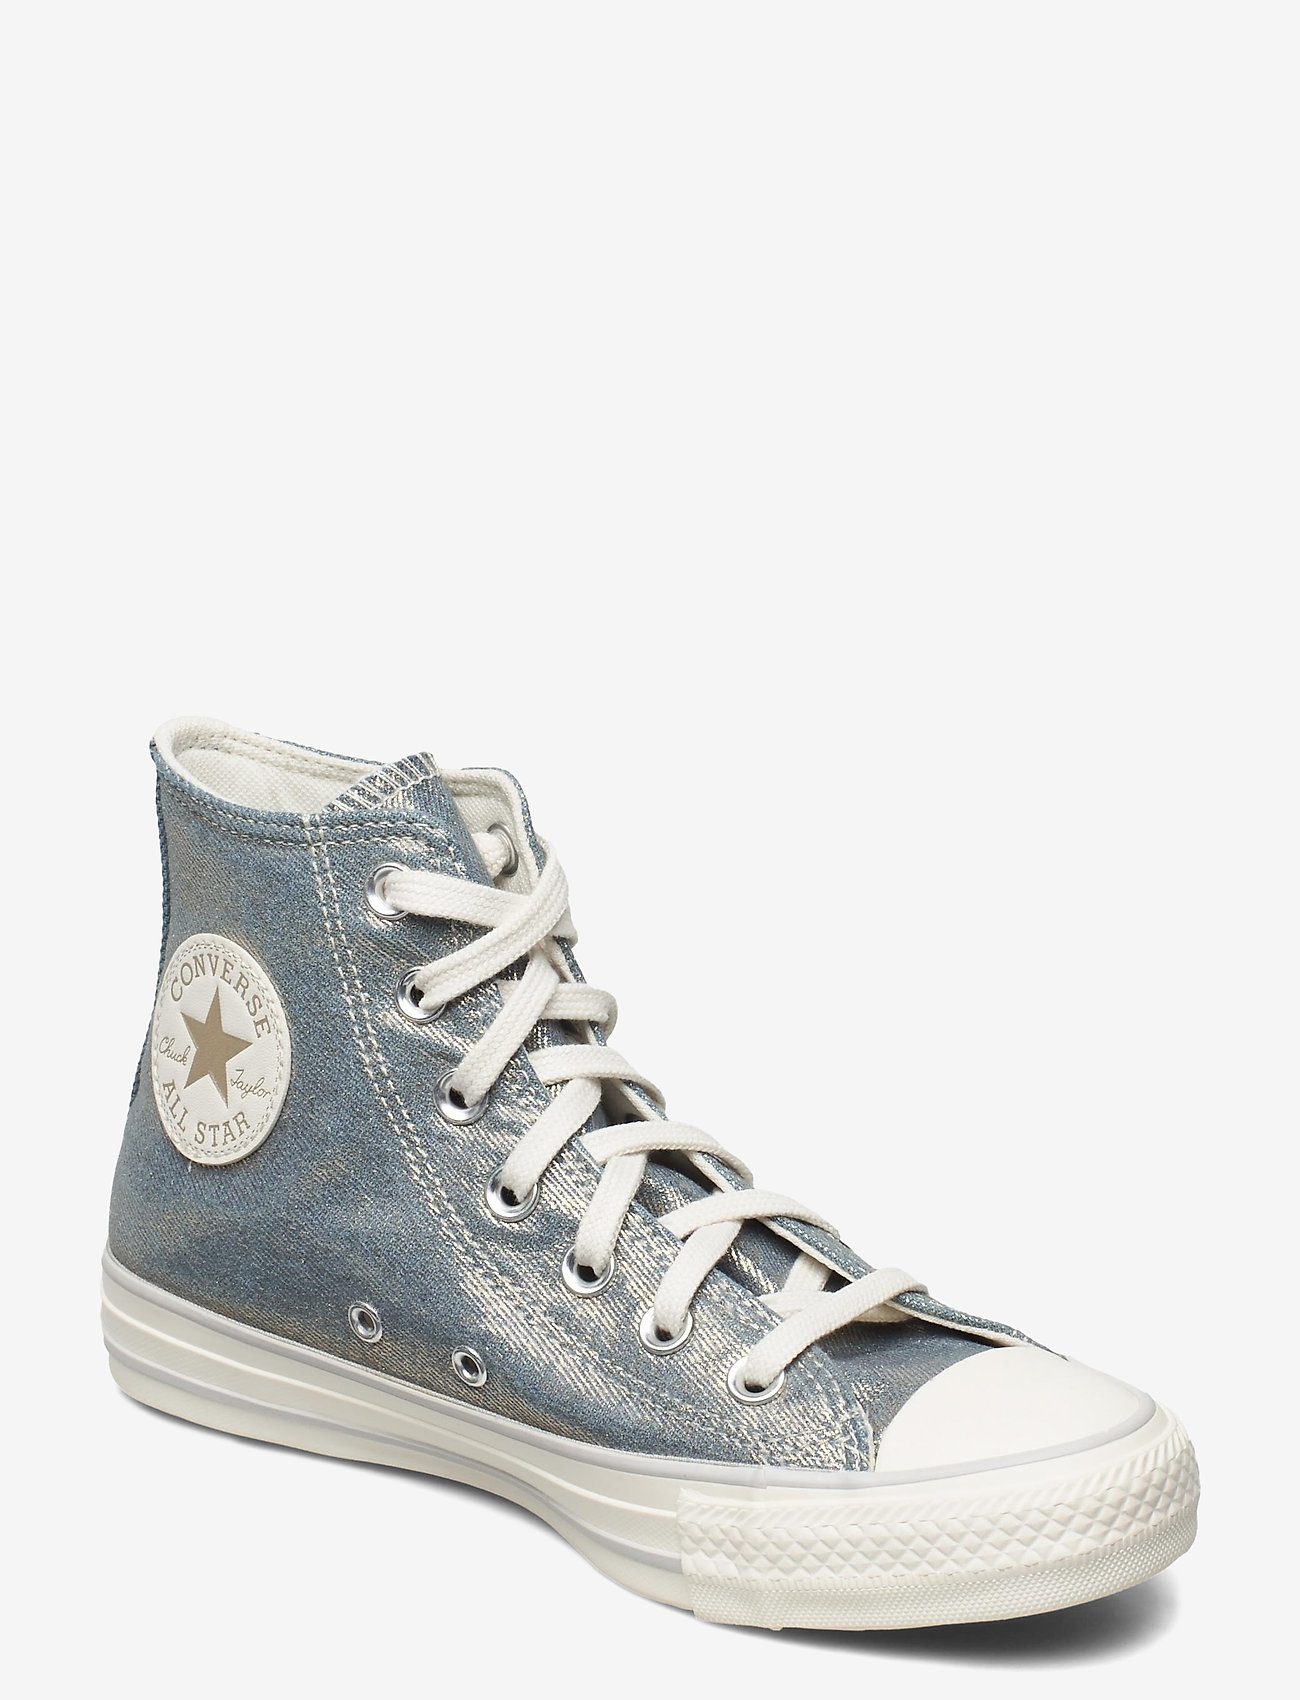 converse washed denim high tops